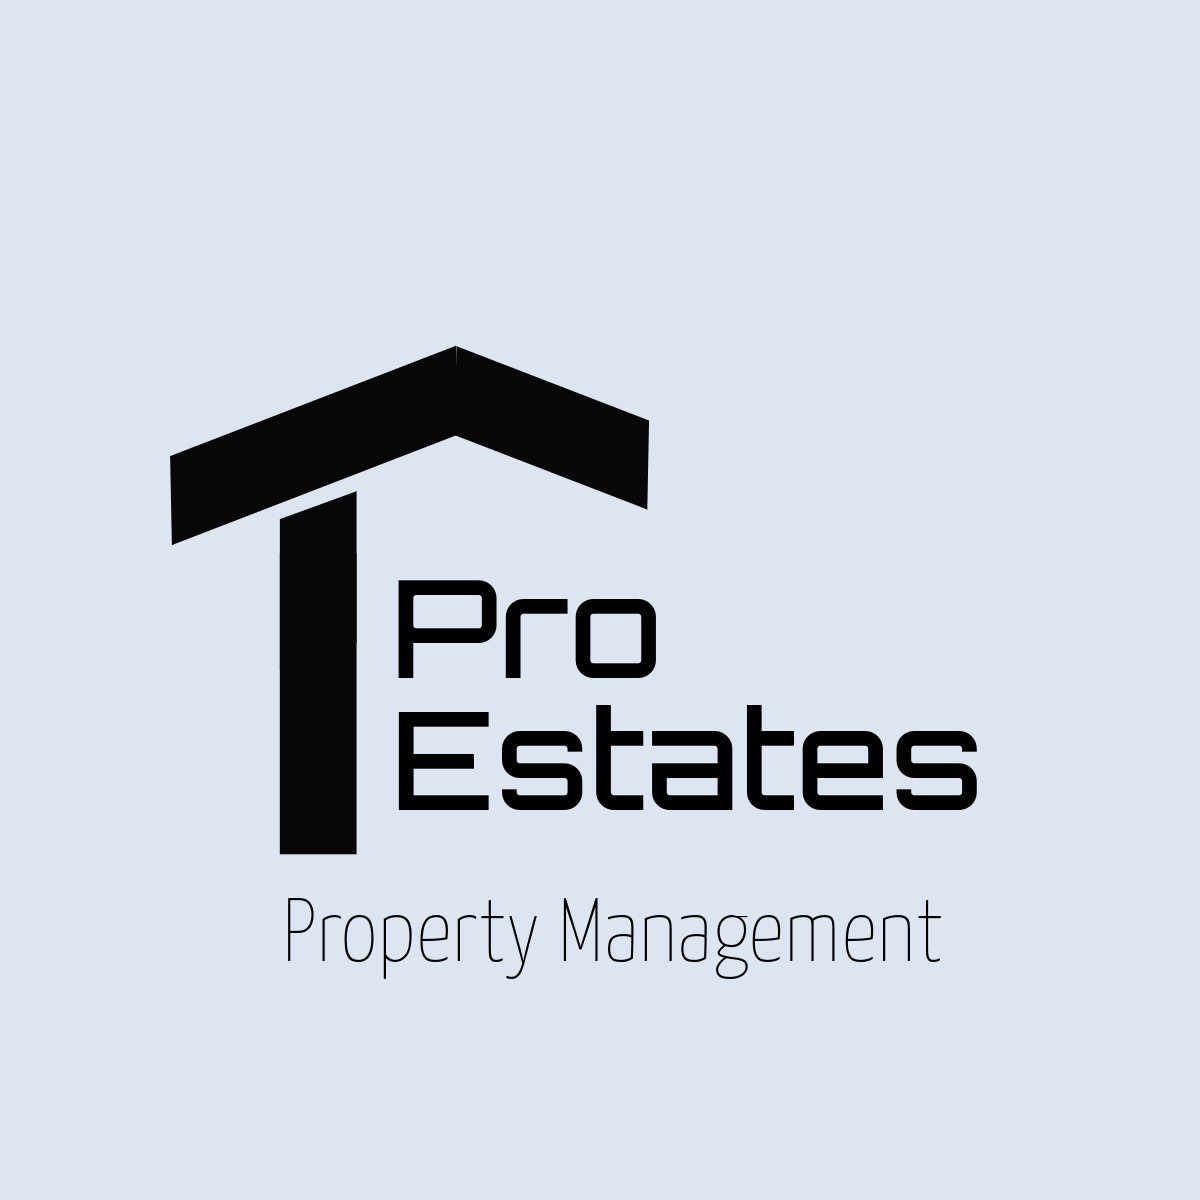 Property Management Company for managing homes, flats, estates and properties